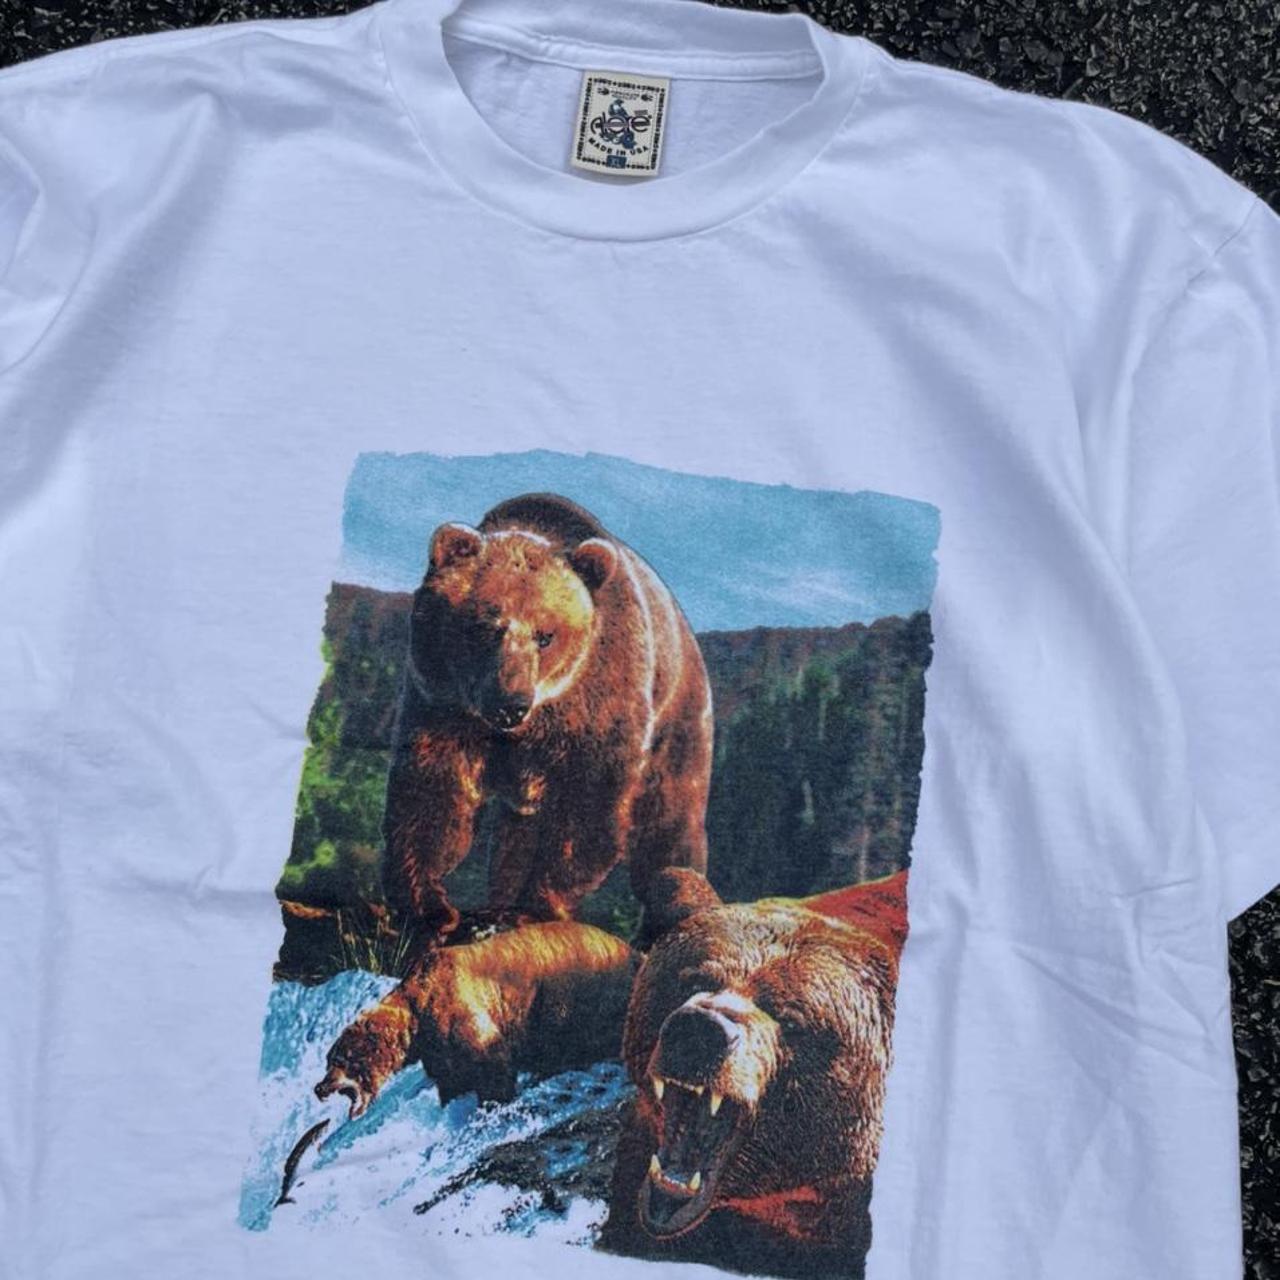 Product Image 3 - Vintage grizzly bear graphic t